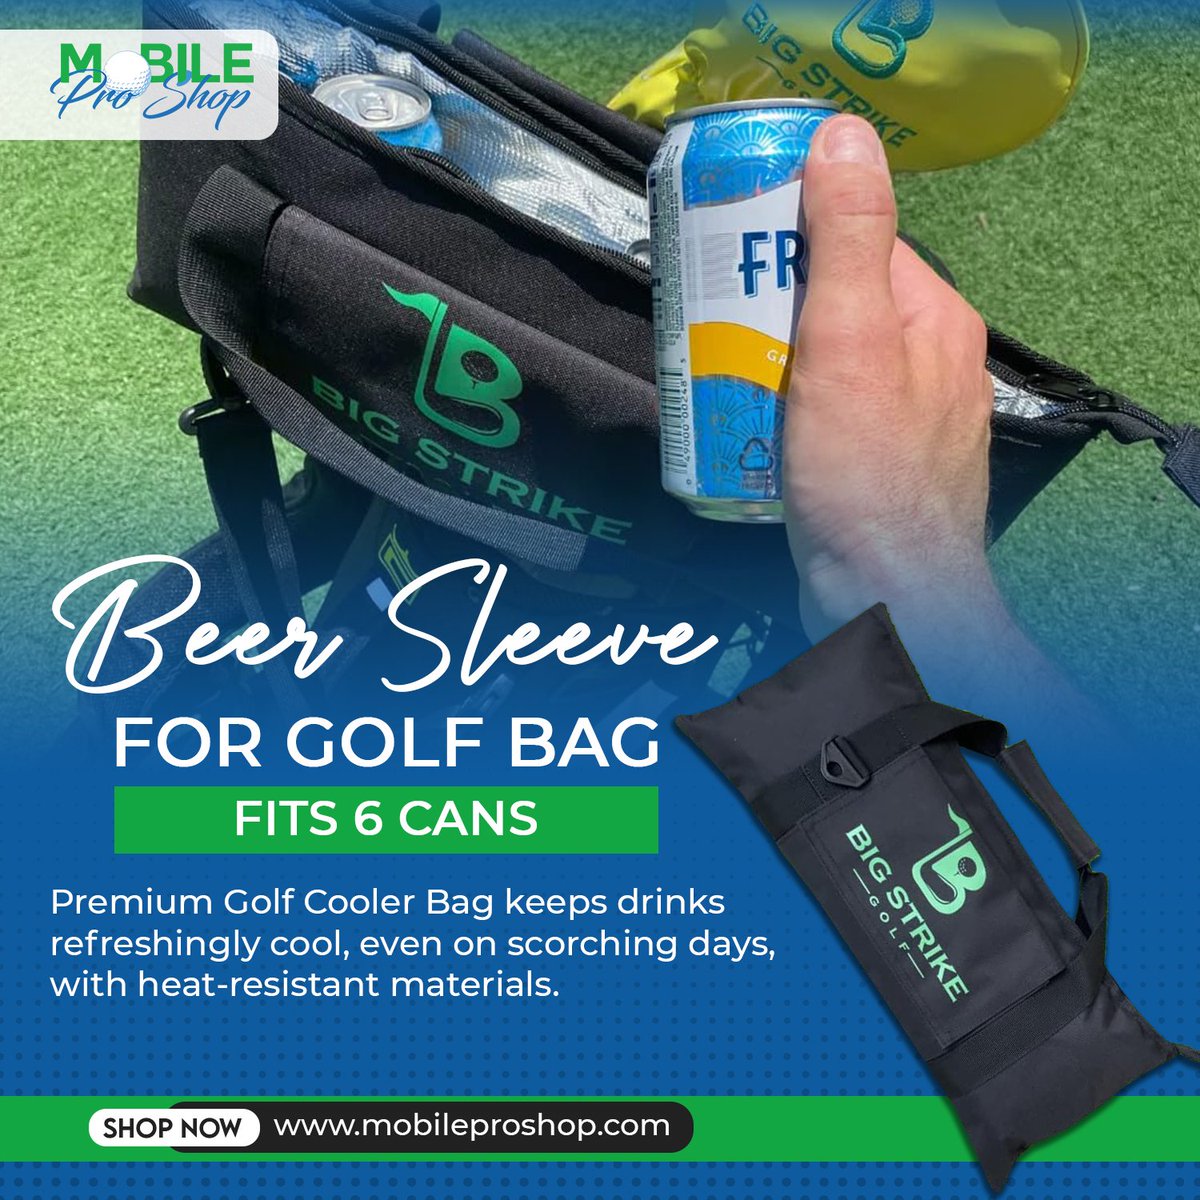 Big Strike Golf - Beer Sleeve for Golf Bag. Fits 6 Cans and Fully Insulated Golf Cooler Bag to Keep Beers and Beverages Ice Cold. 

#golf #cooler #coolerbag #coolerbag #golfing #golfclub #golfcourse #golfperformance #golfswingtips